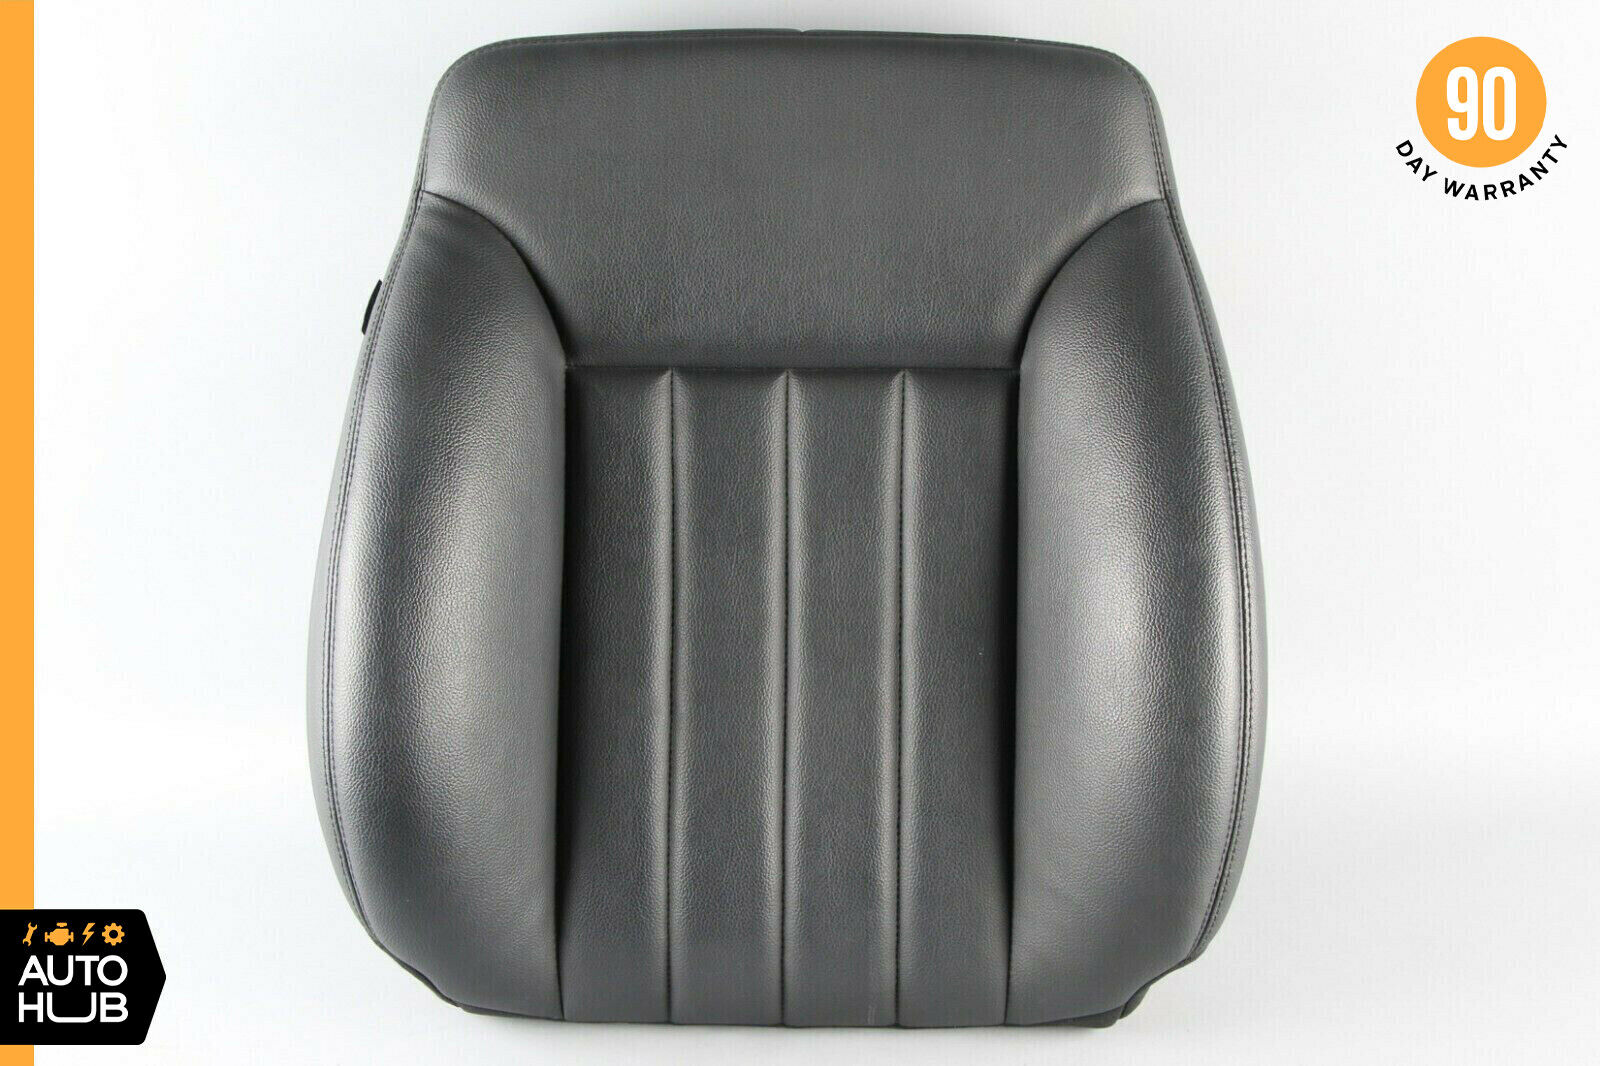 06-10 Mercede W164 ML320 R500 Front Right Passenger Top Upper Seat Cushion OEM